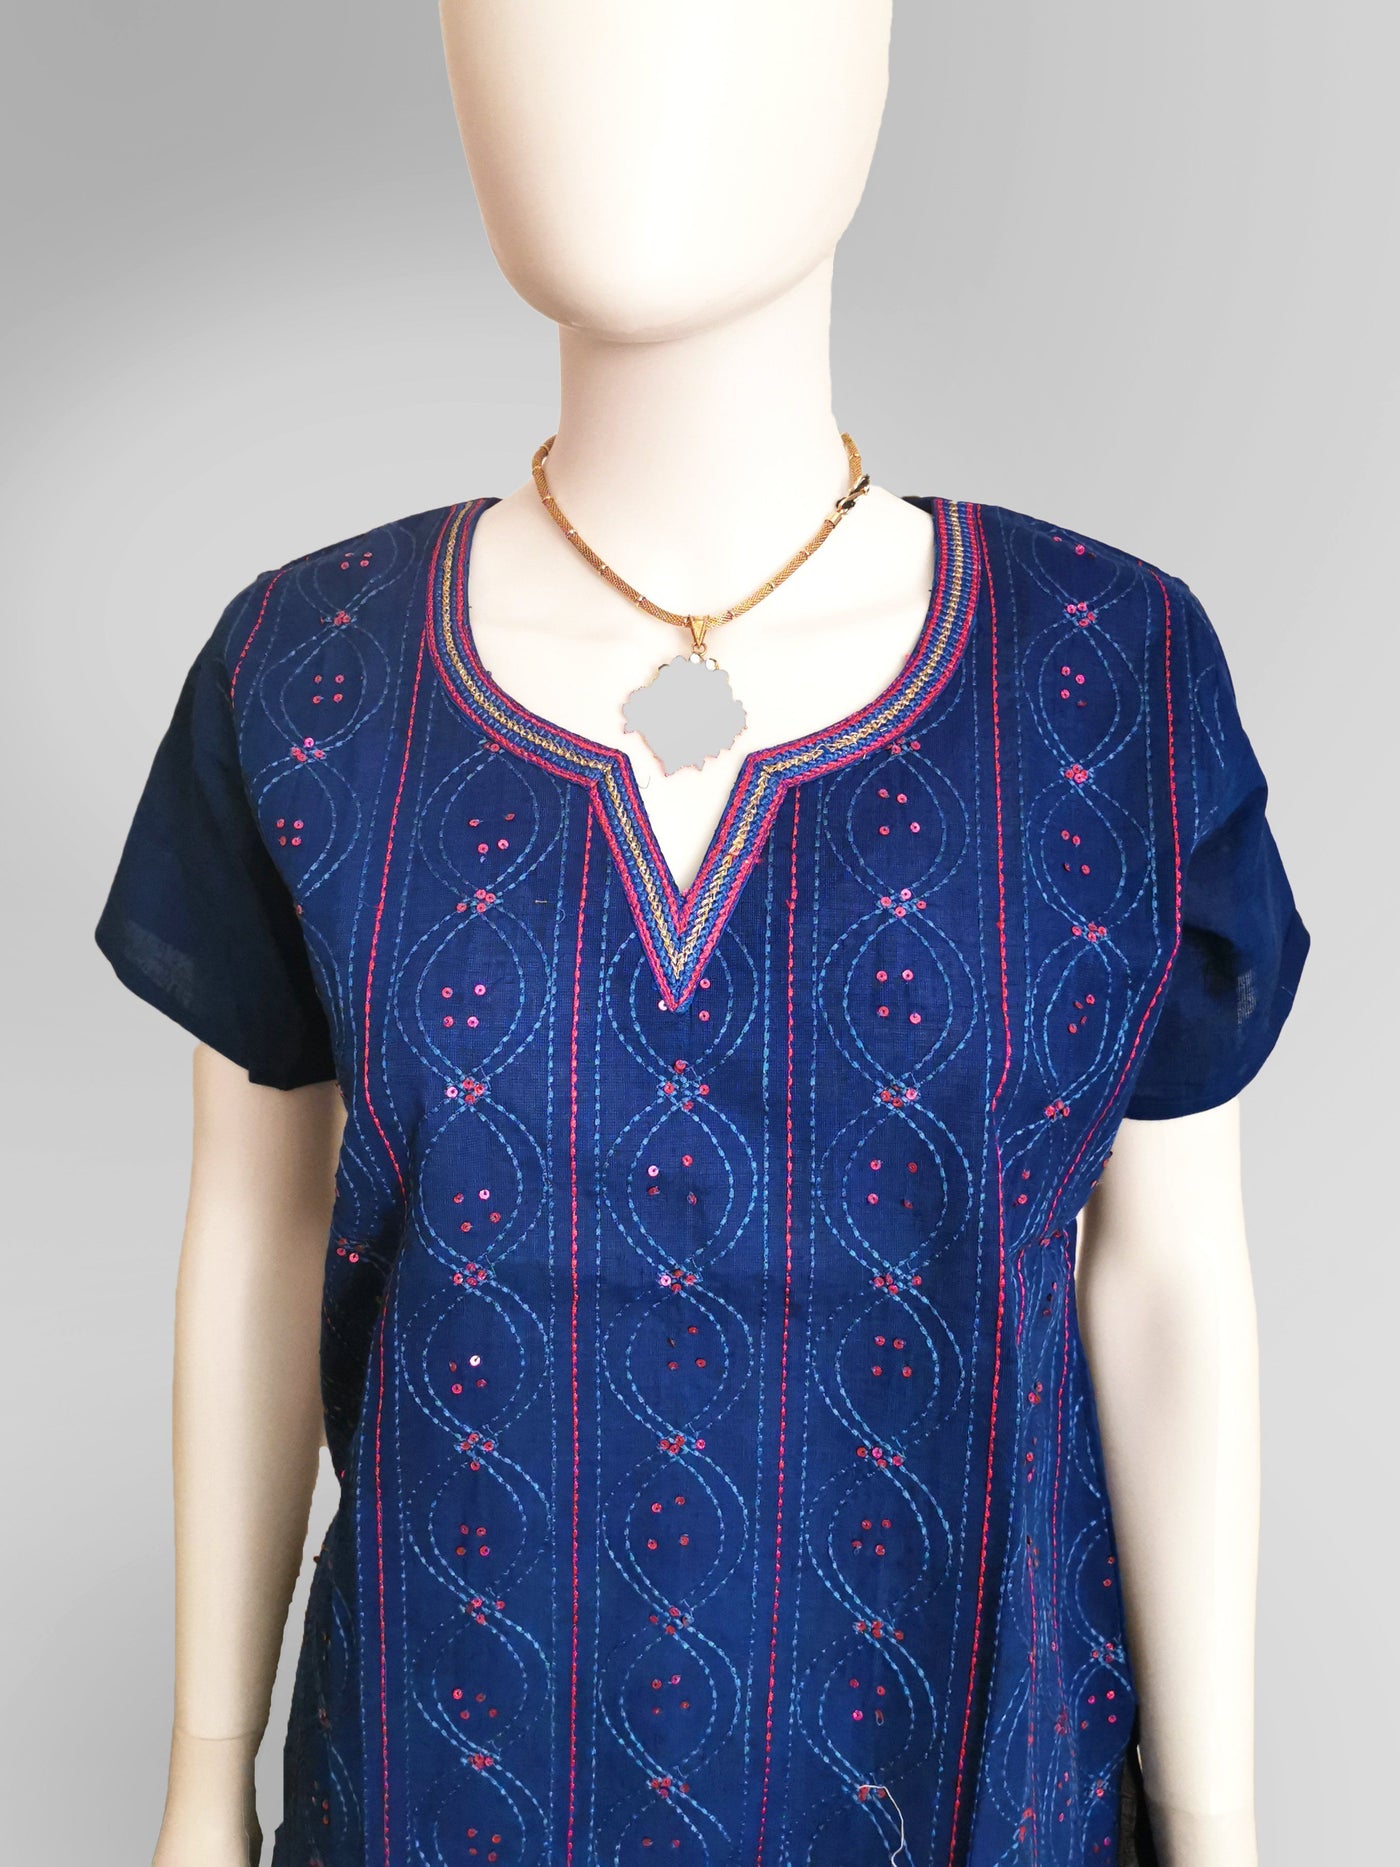 Kurti Top in Deep Blue - Indian Clothing in Denver, CO, Aurora, CO, Boulder, CO, Fort Collins, CO, Colorado Springs, CO, Parker, CO, Highlands Ranch, CO, Cherry Creek, CO, Centennial, CO, and Longmont, CO. Nationwide shipping USA - India Fashion X